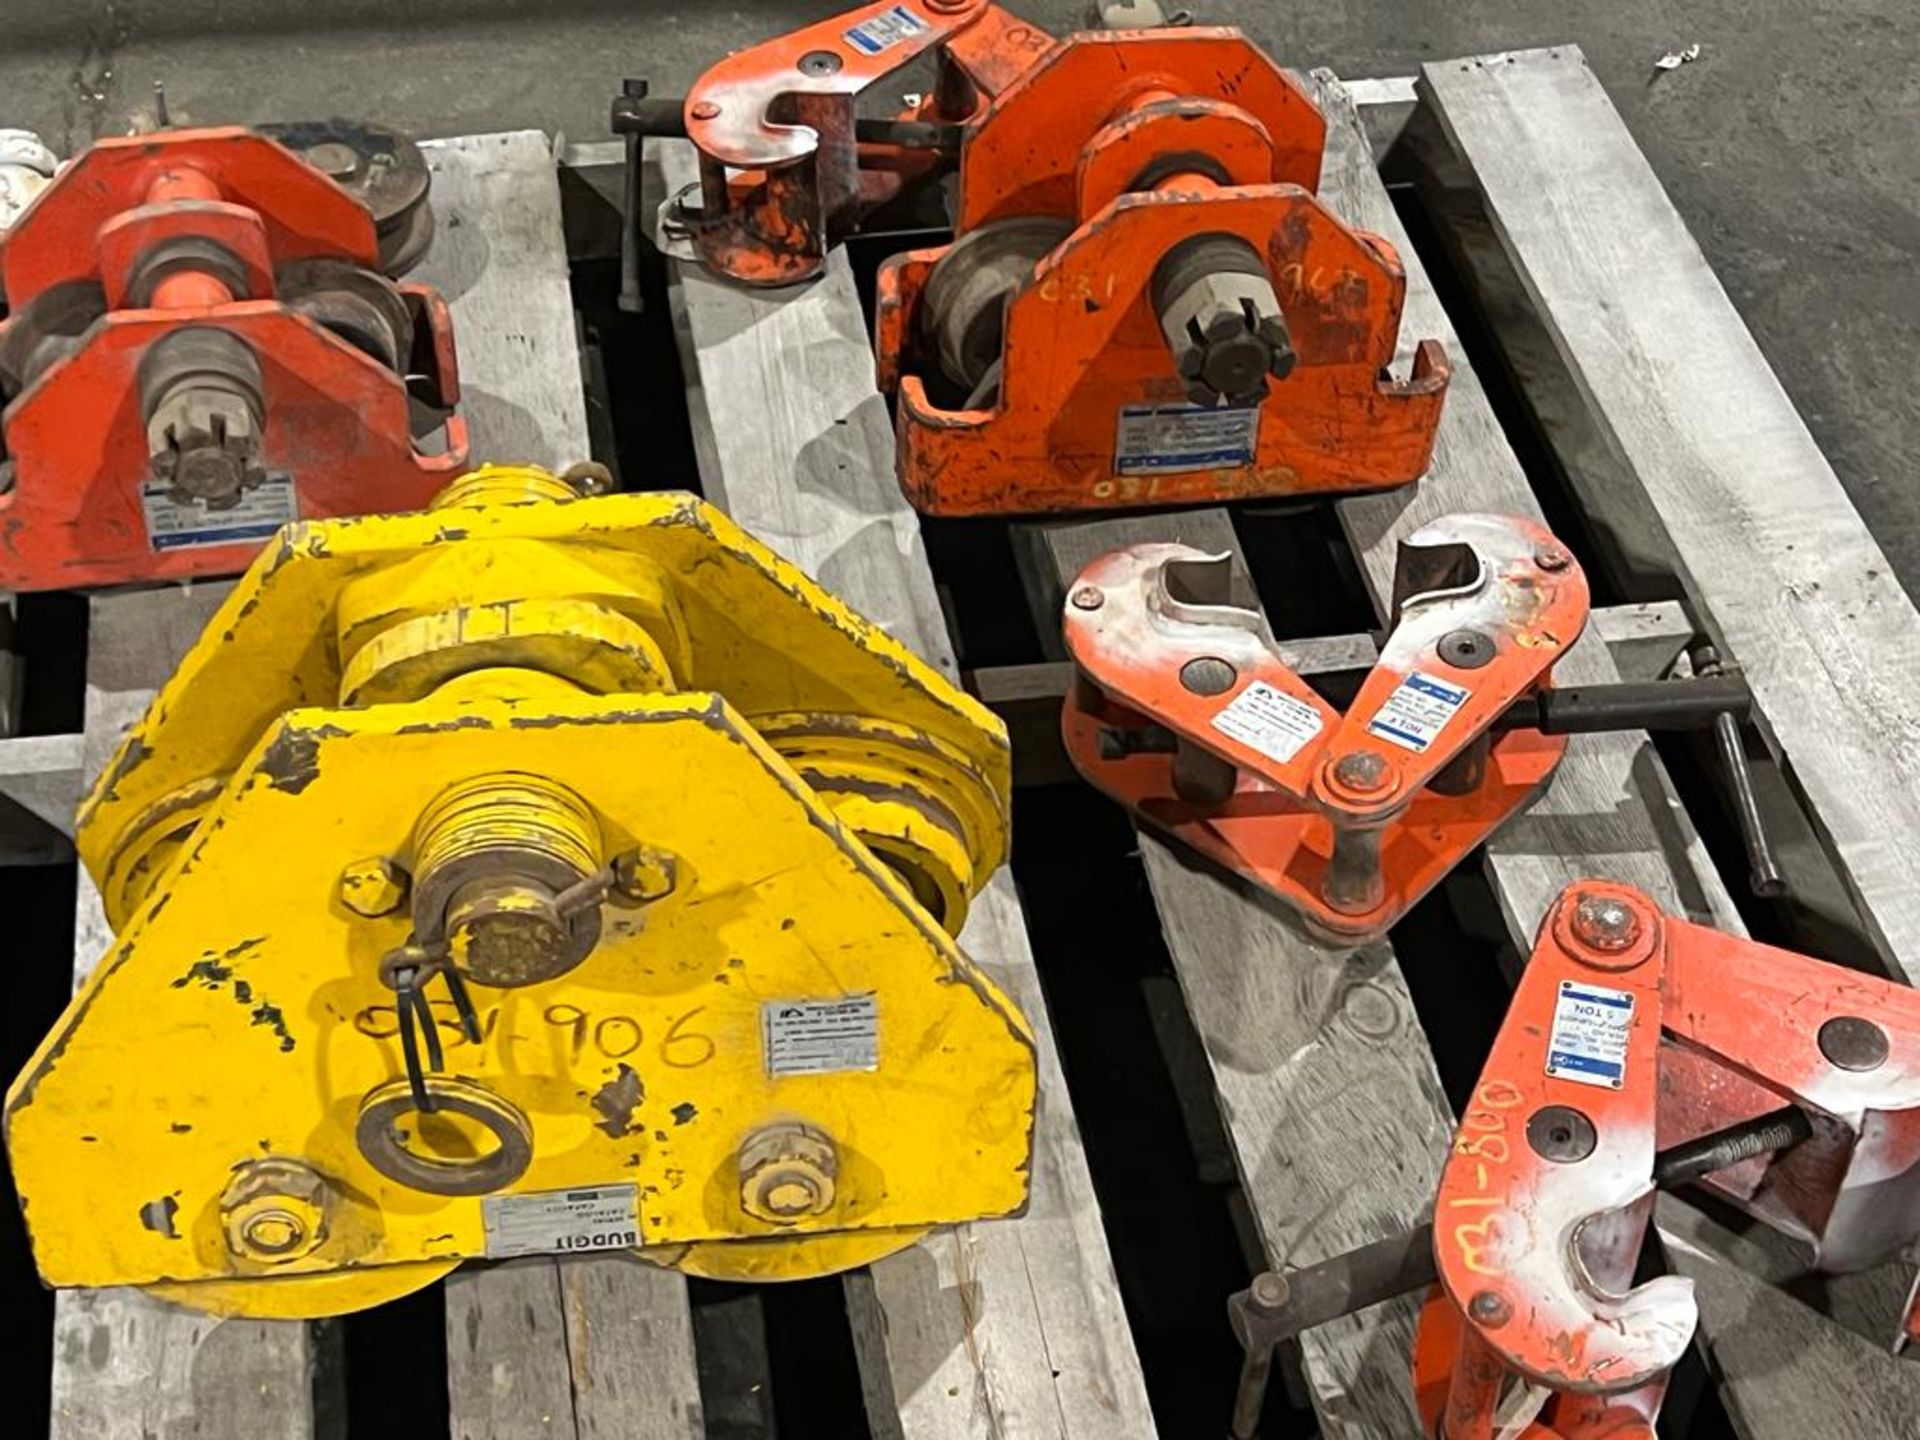 Lot of 6 (6 units) Hoist Trolleys and Beam Clamps - 8, 5 and 3 ton Trolleys, 2X 5 & 3 ton beam